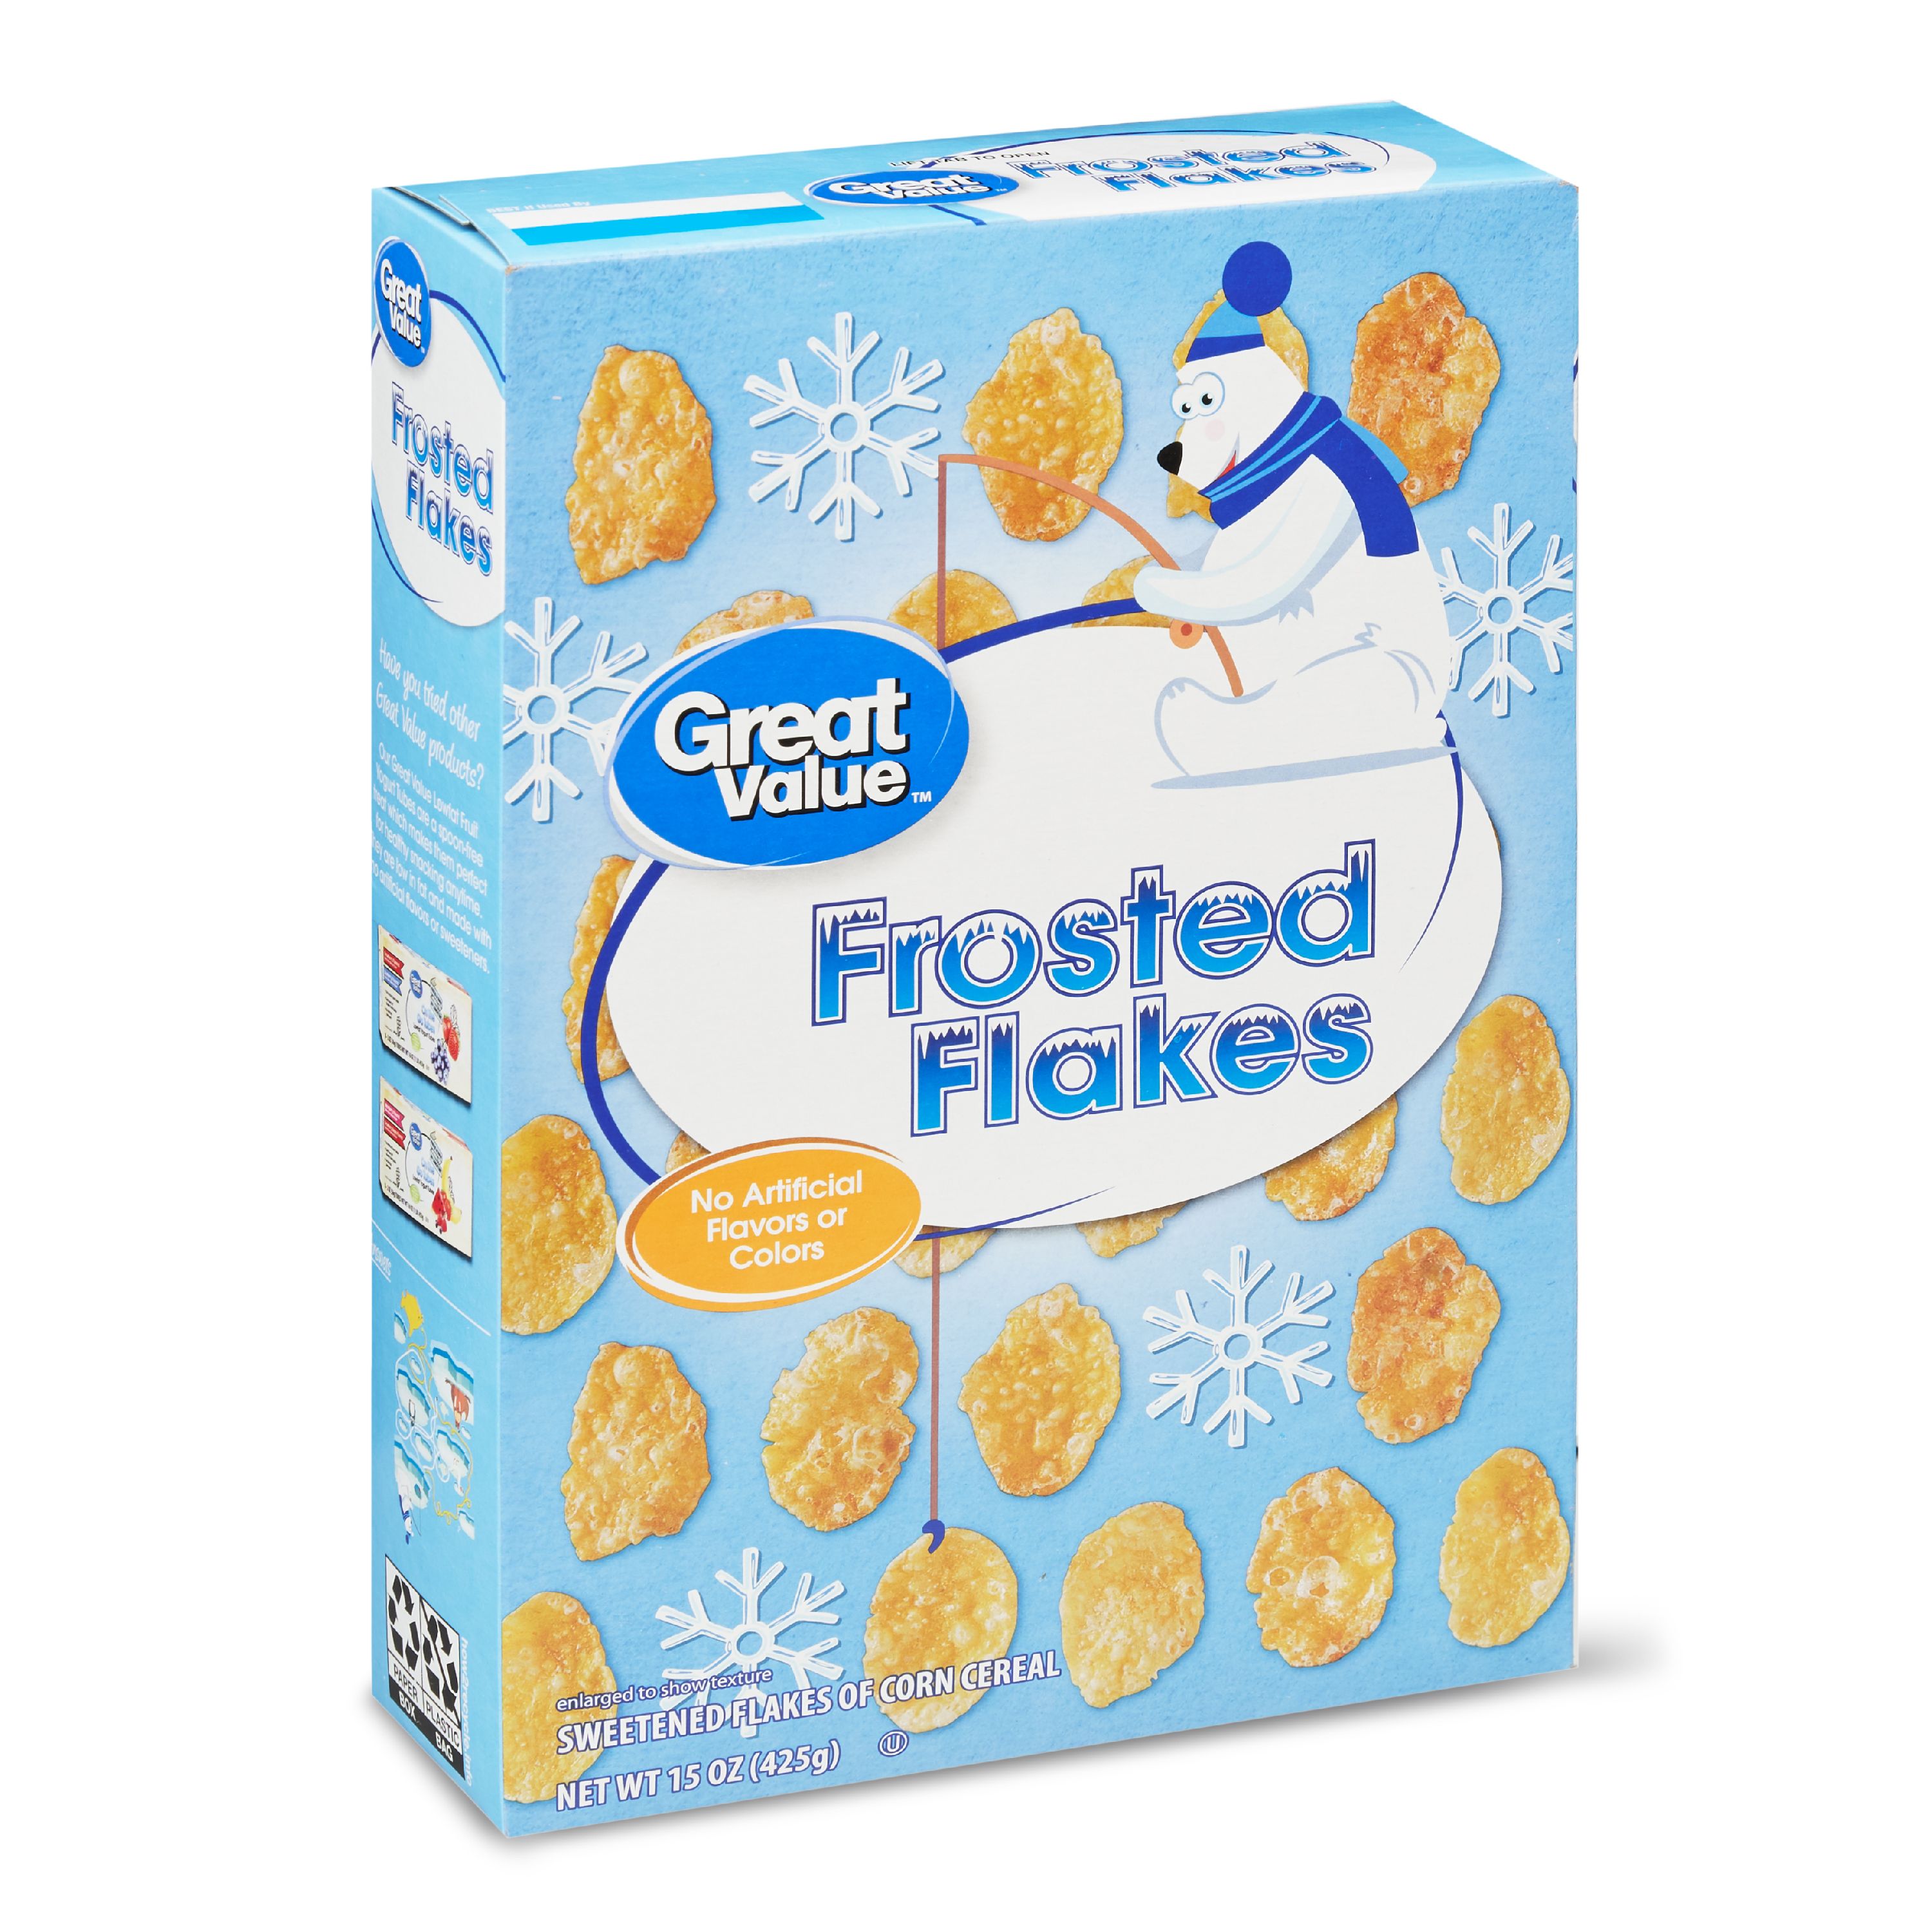 Great value frosted flakes